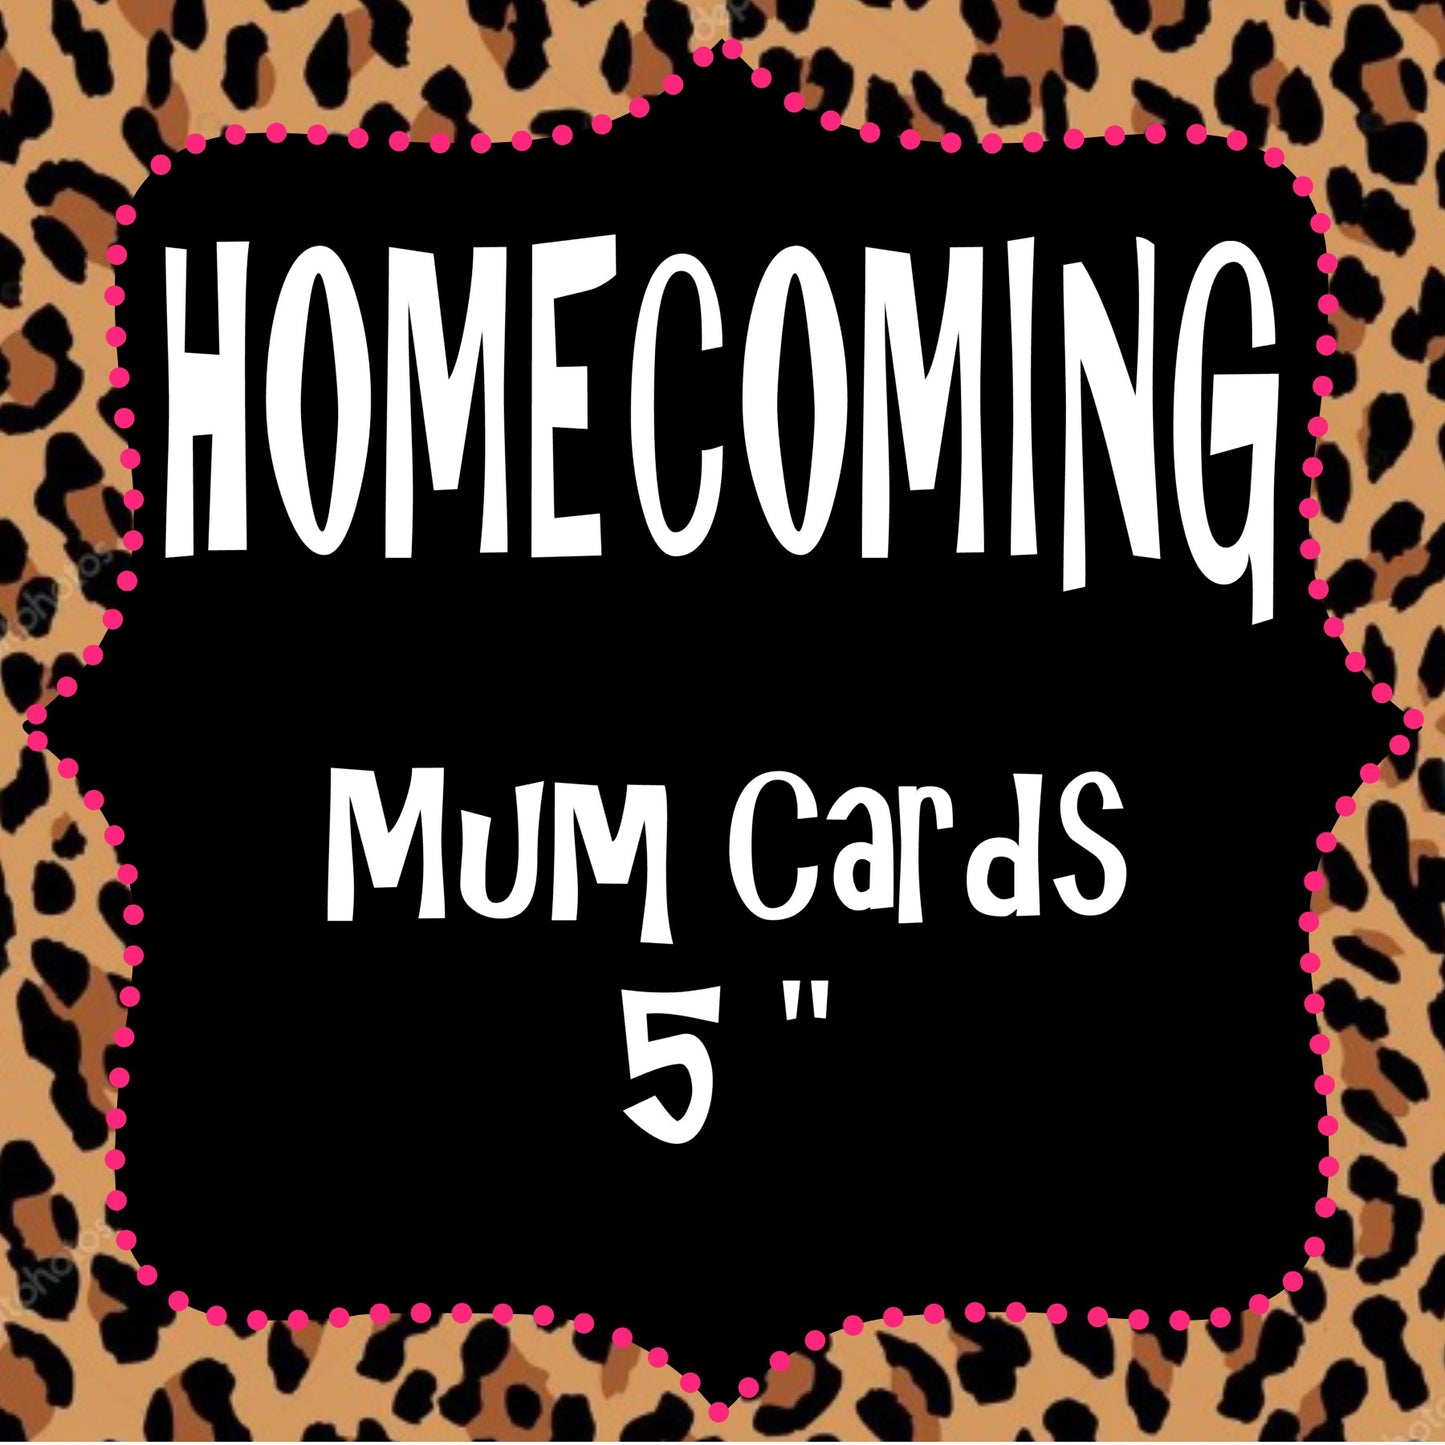 Homecoming - Mum Cards 5 inches wide